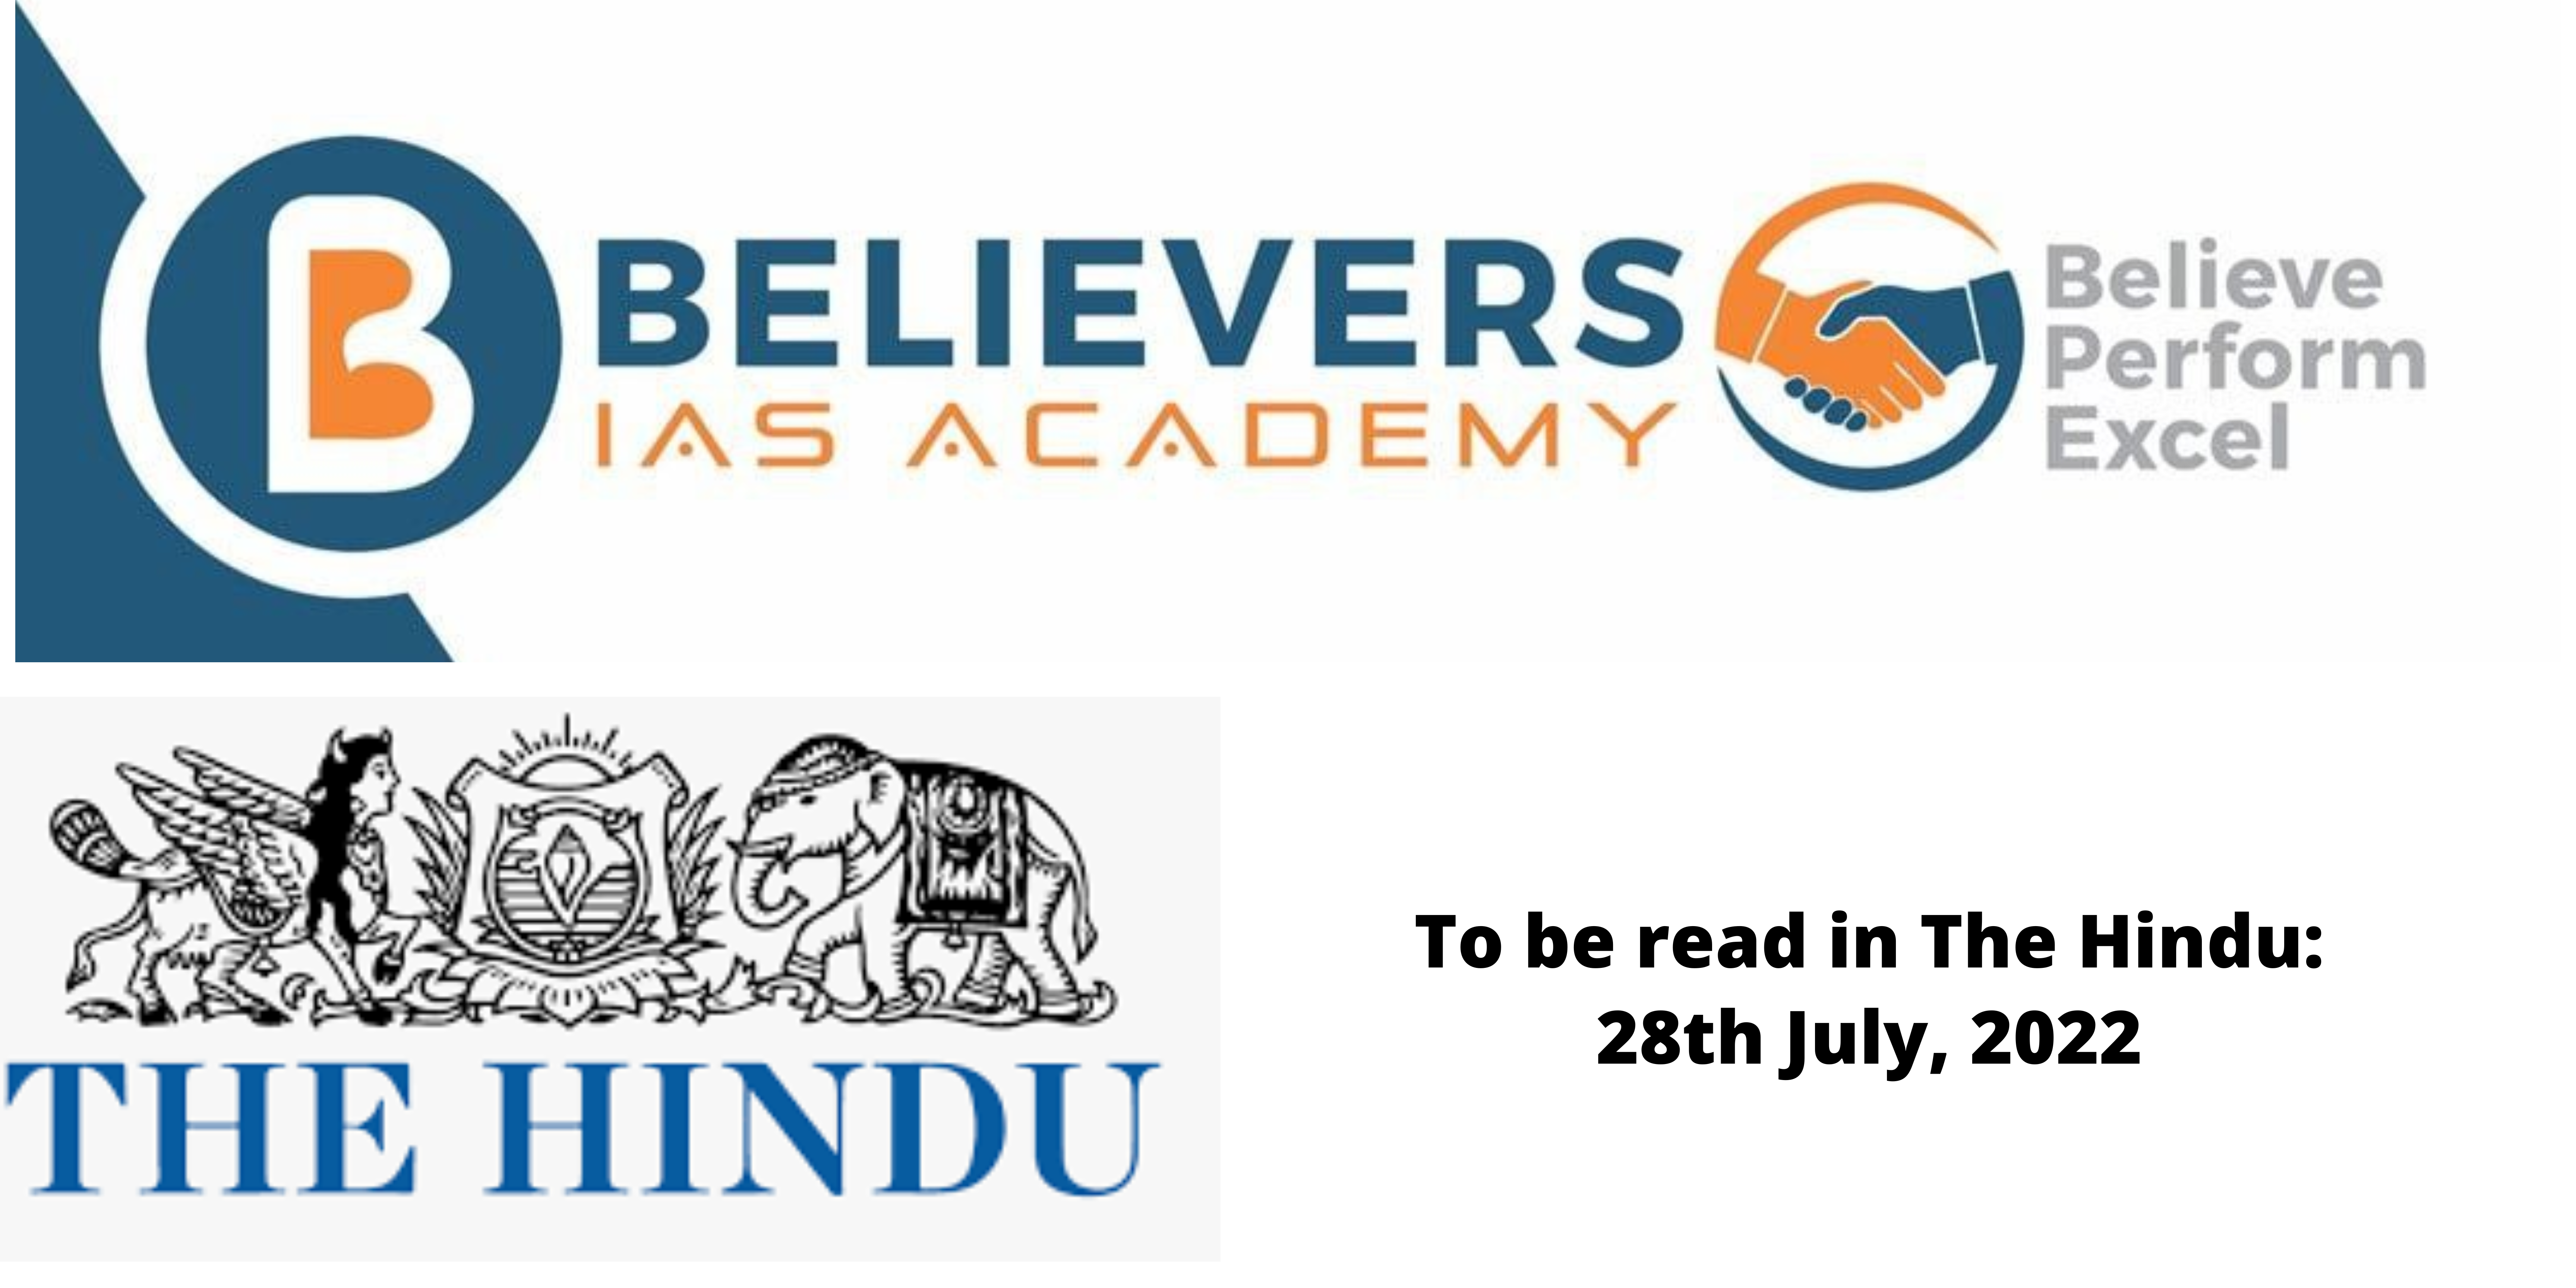 News articles for Civil Services Exam preparation - 28th July, 2022